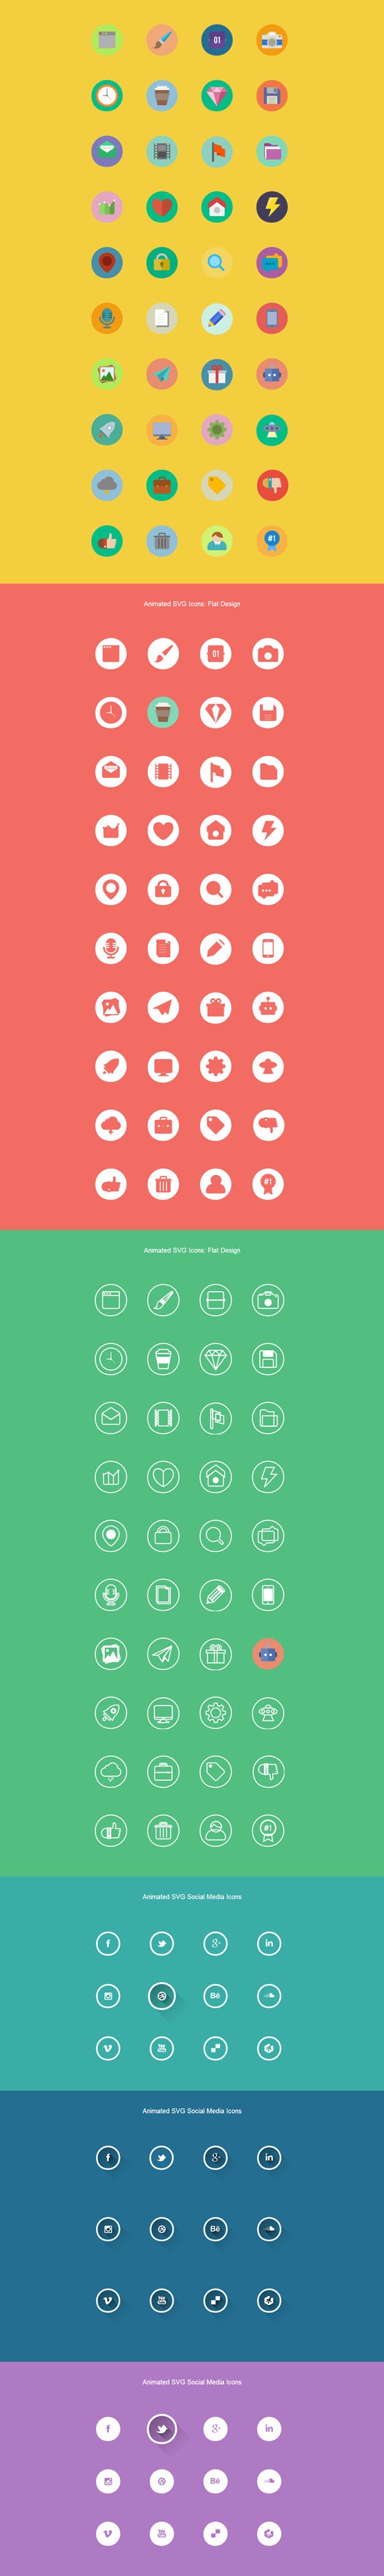 Free Animated Icons Download